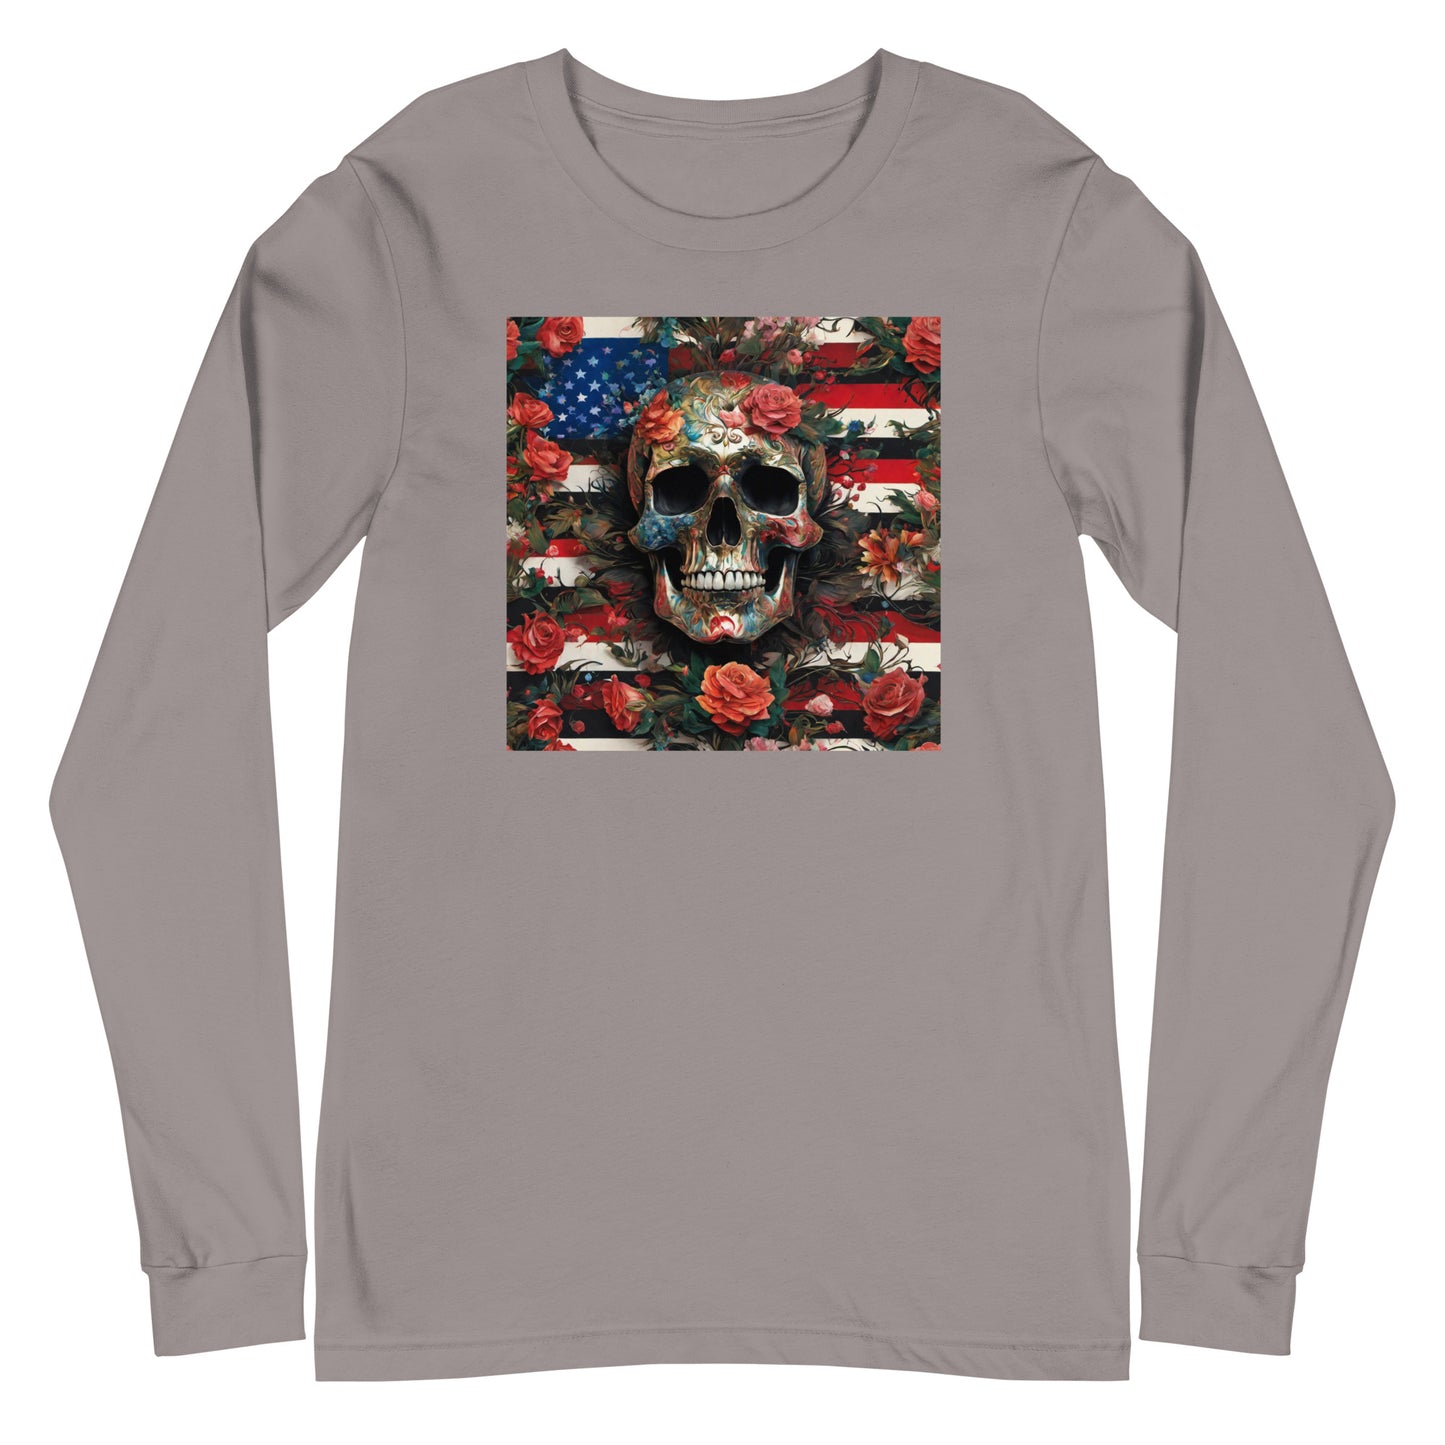 Skull, Roses, and Flag Long Sleeve Graphic Tee Storm